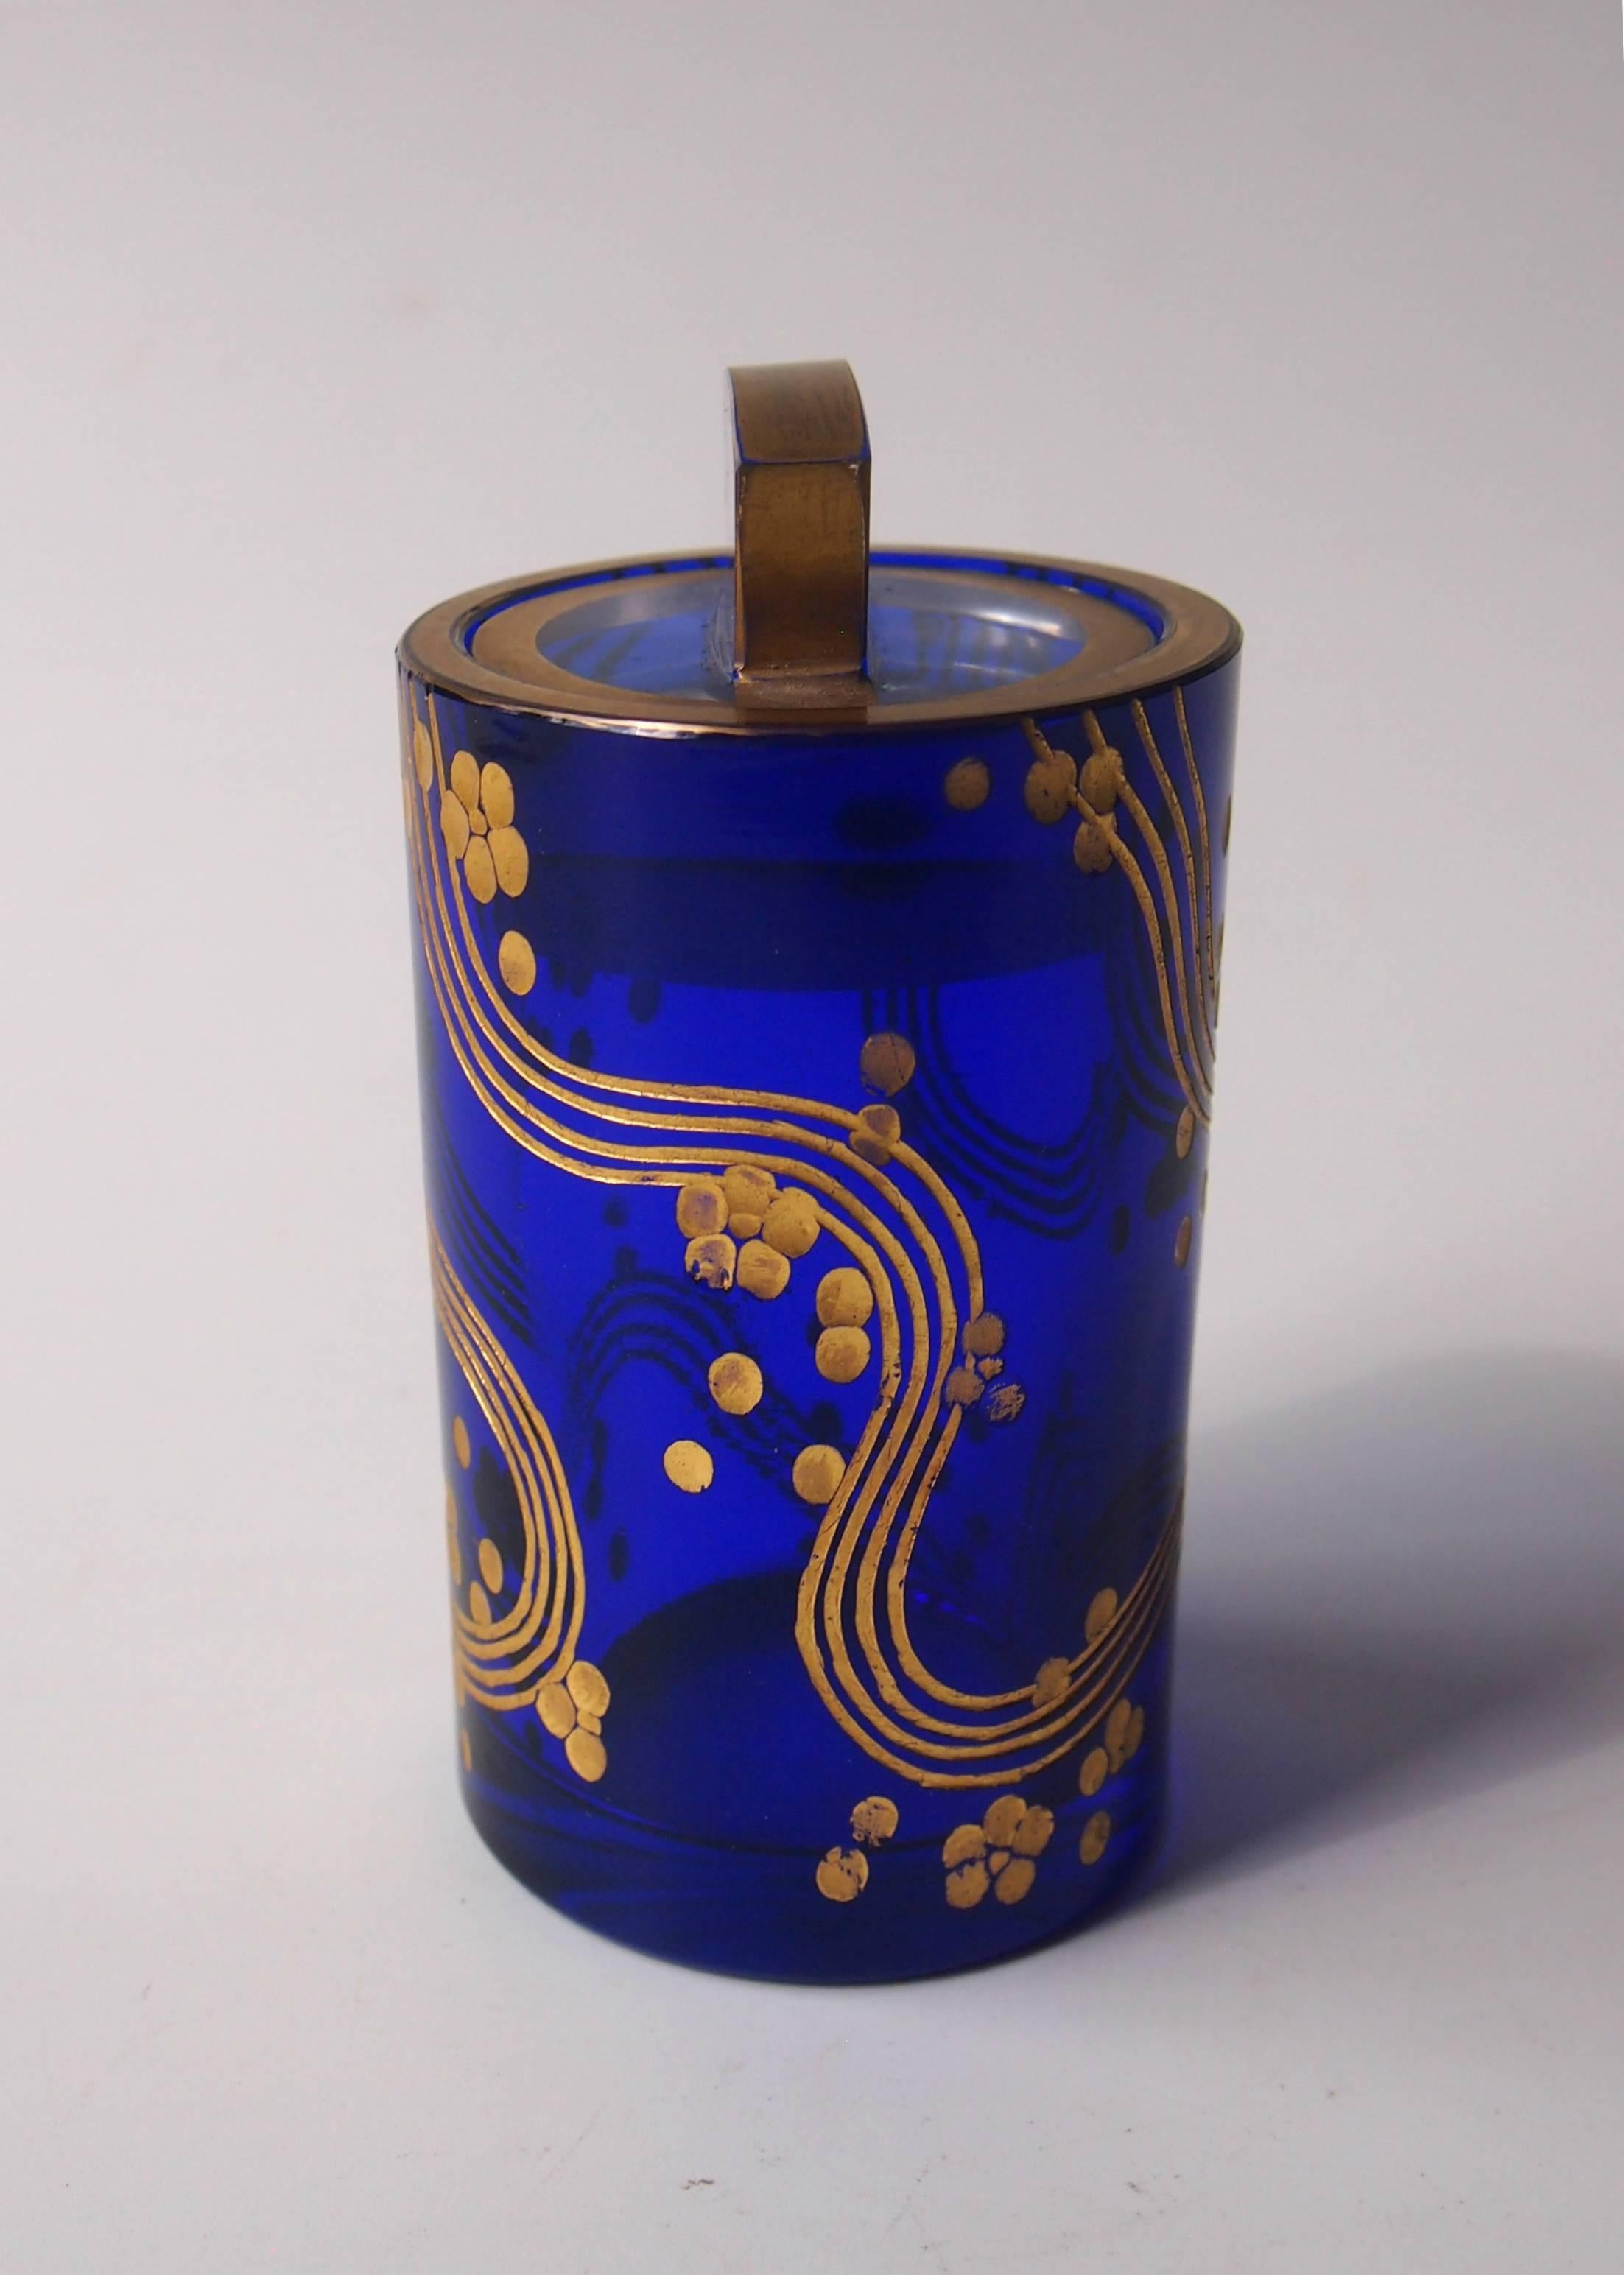 Exceptionally stylish cobalt blue and gilded small pot and cover by Ortel of Haida in the Wiener Werkstätte style -Ortel made a lot of pieces for the Wiener Werkstätte -we are not sure if this is for them or just in that style. Both the base of the